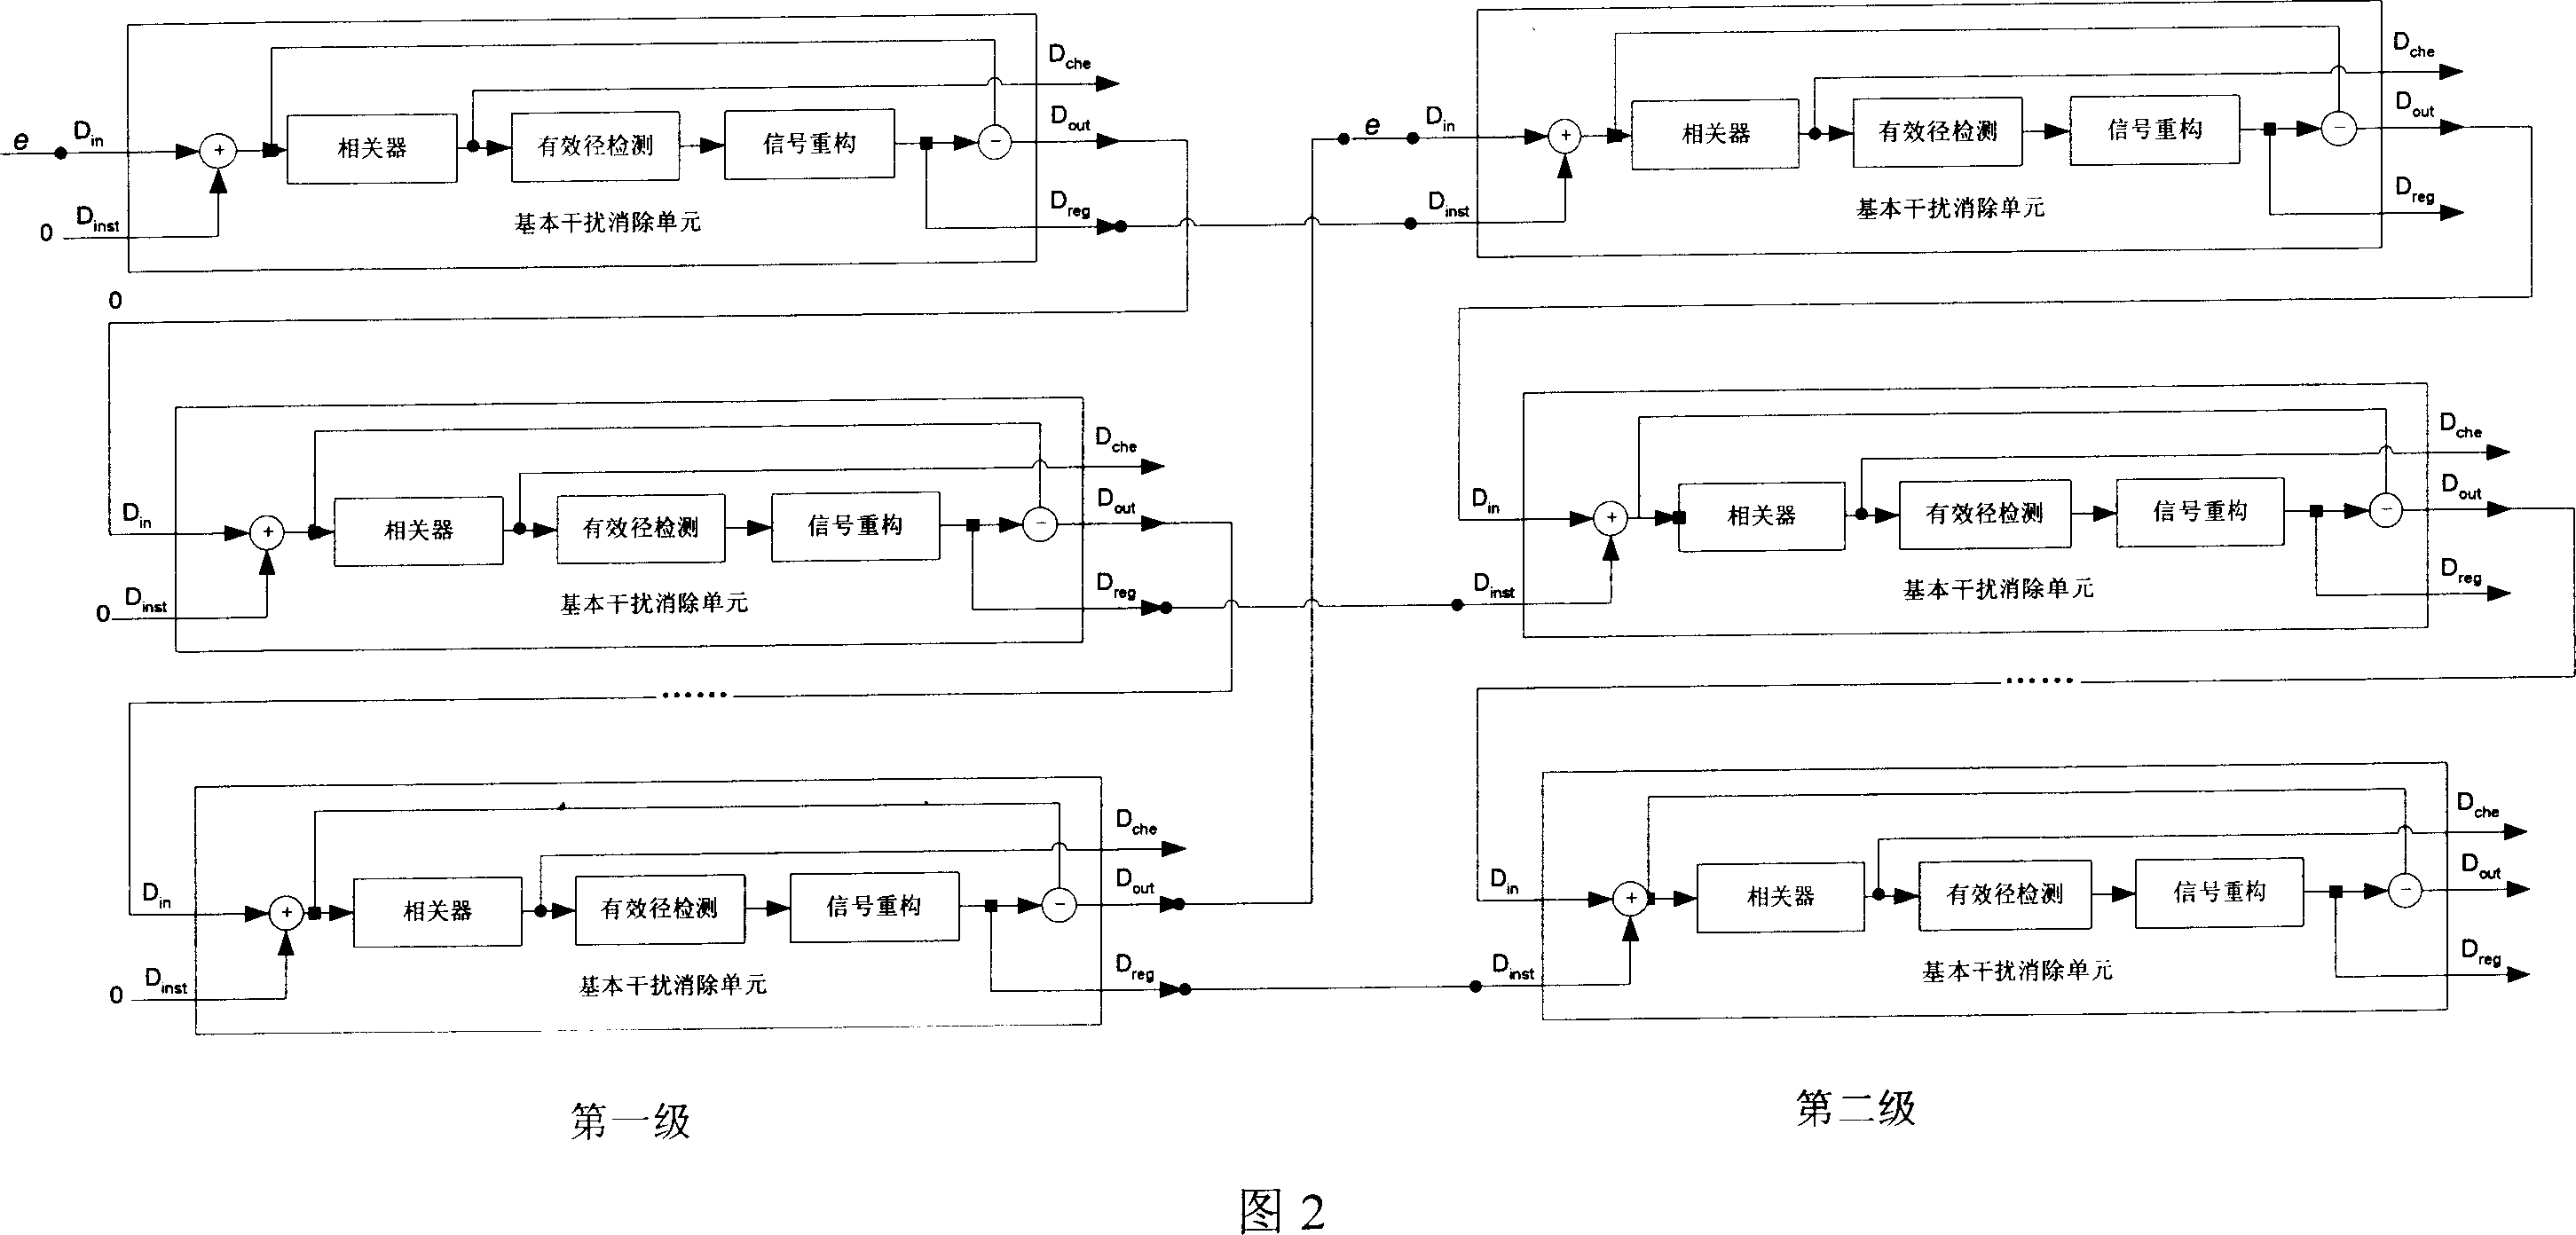 Multi-cell channel estimation method based on elimination of serial interference